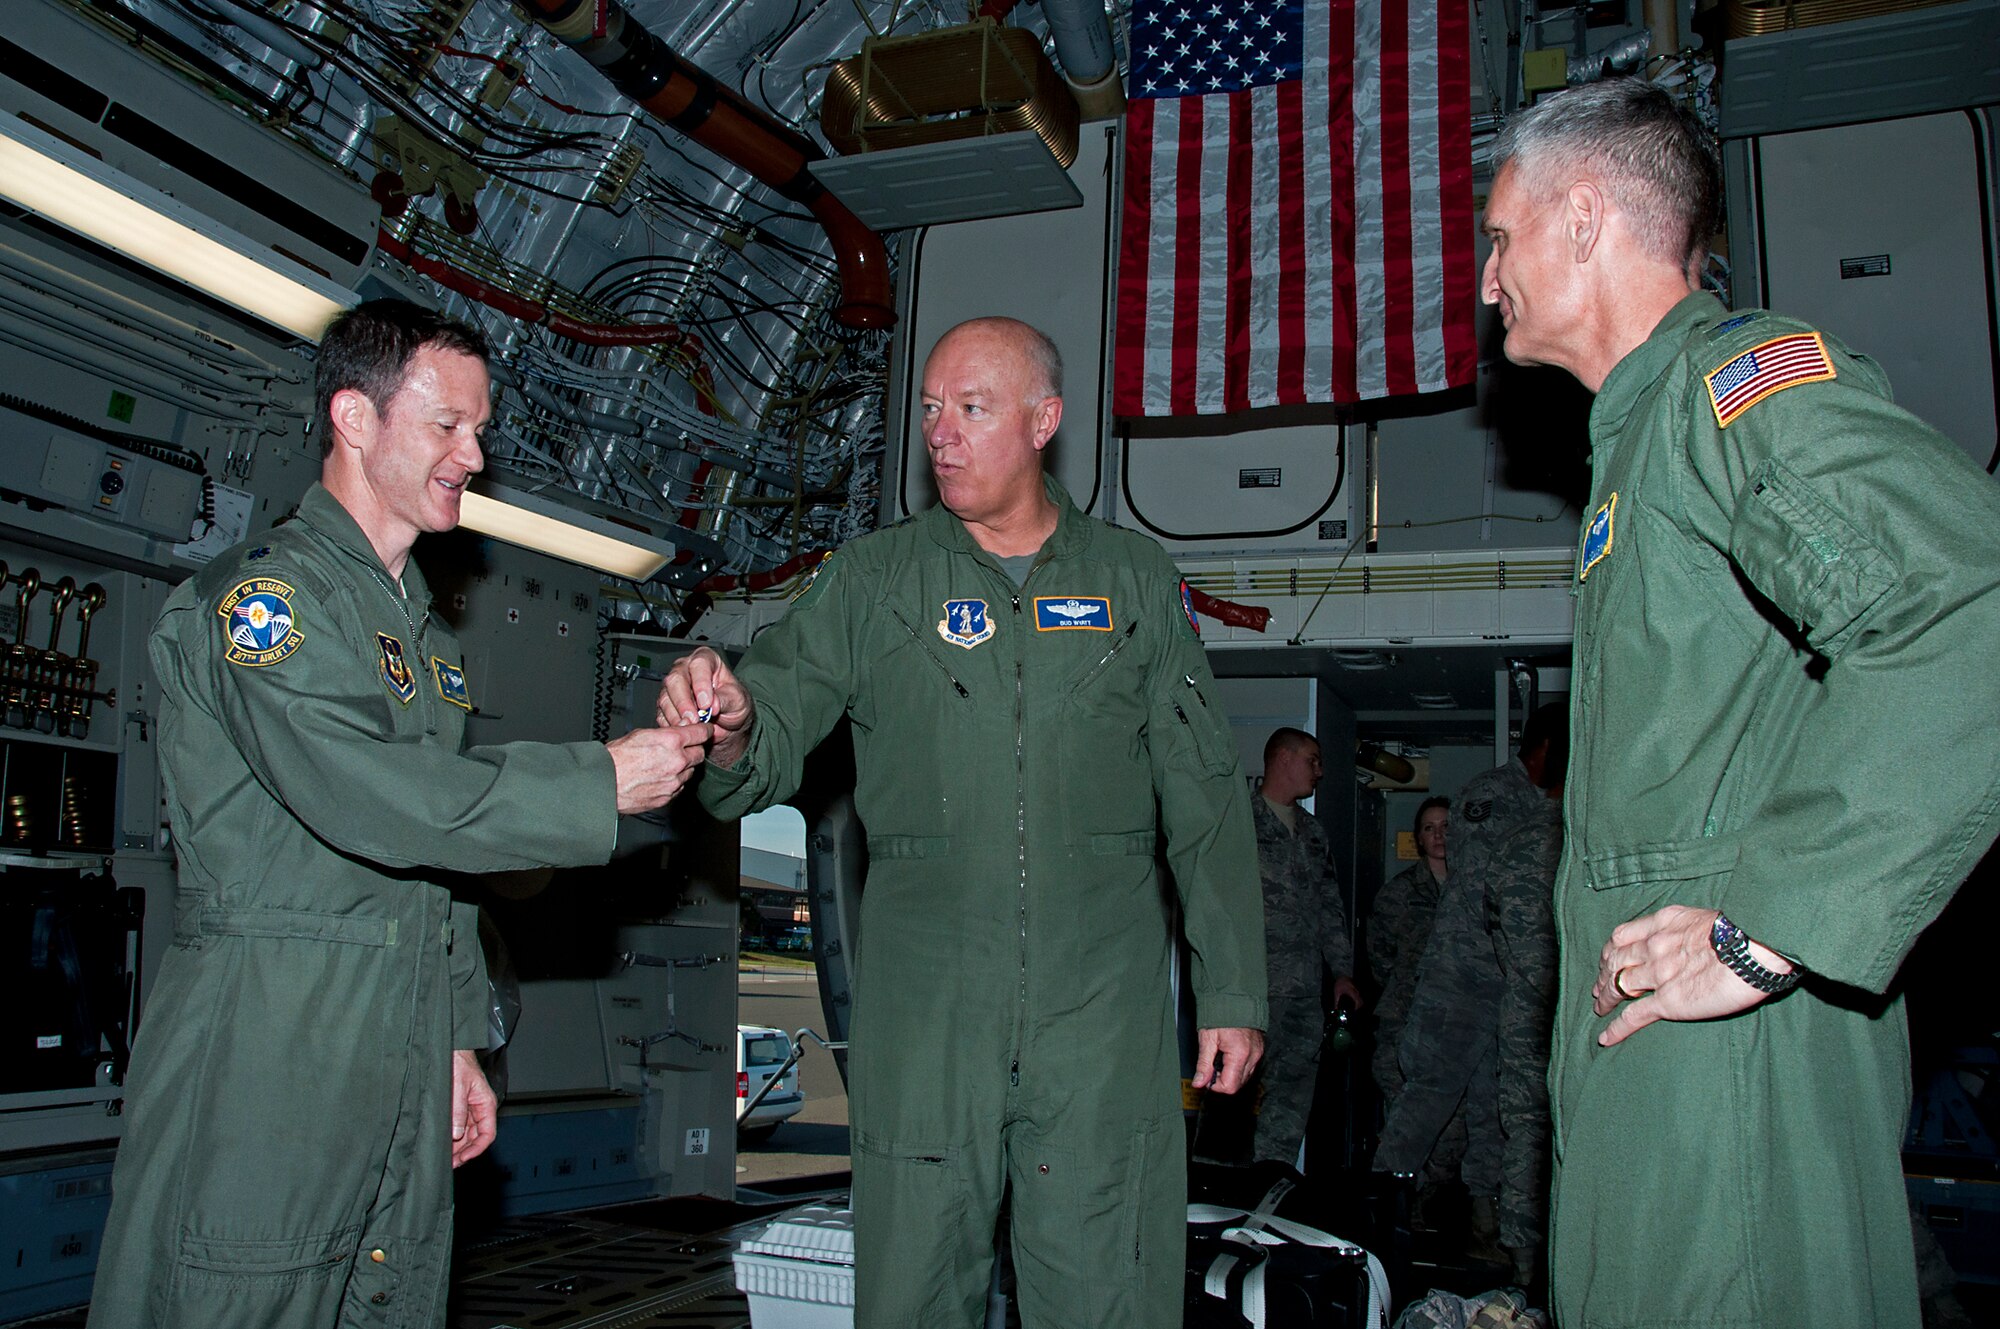 Lt. Gen. Harry M. Wyatt III, Air National Guard director, passes the symbolic "keys" to Joint Base Charleston's newest C-17 to Lt. Col. Mike DeSantis, 317th Ailift Squadron, so that he can present them to 315th Airlift Wing Commander, Col. Steven Chapman. The general was the honorary aircraft commander during the flight from Longbeach, Calif. while Colonel DeSantis was one of the pilots.
 (U.S. Air Force Photo by Michael Dukes)